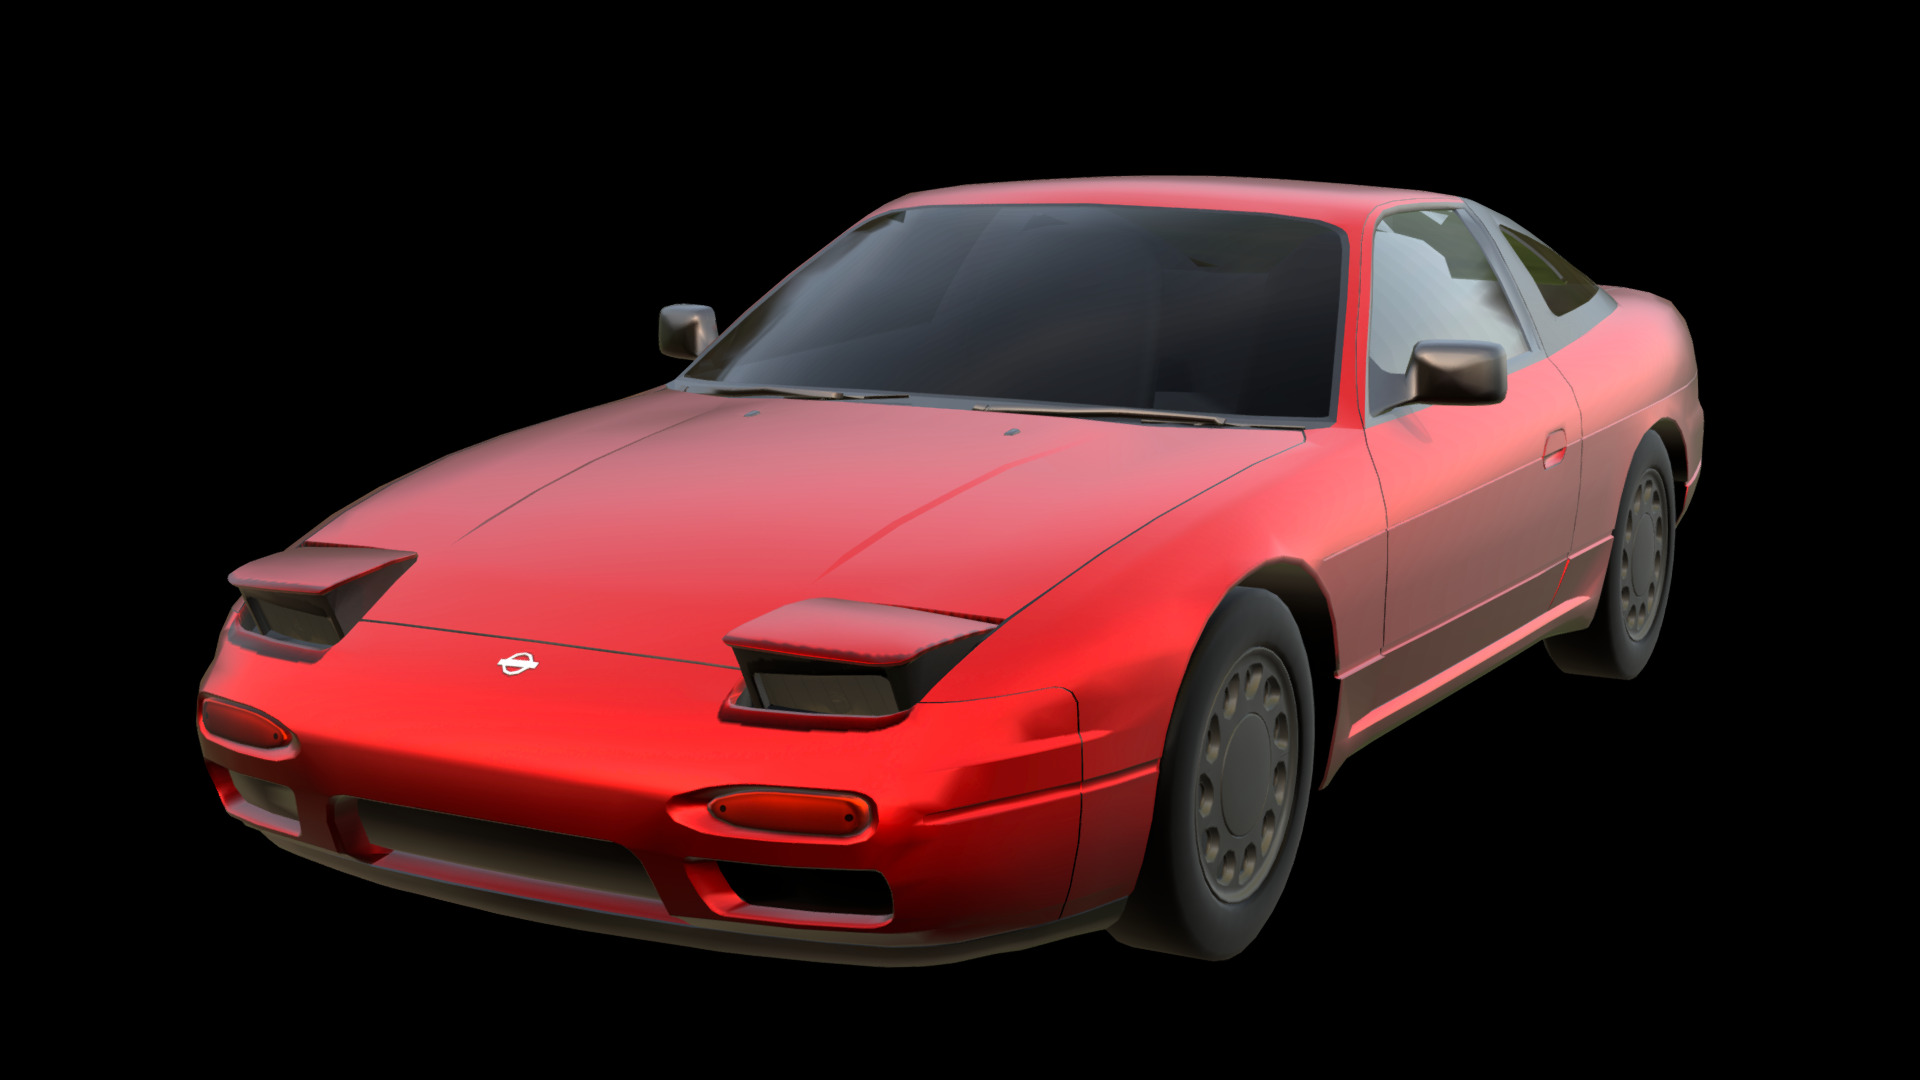 3D model Nissan 180sx - This is a 3D model of the Nissan 180sx. The 3D model is about a red car with a black background.